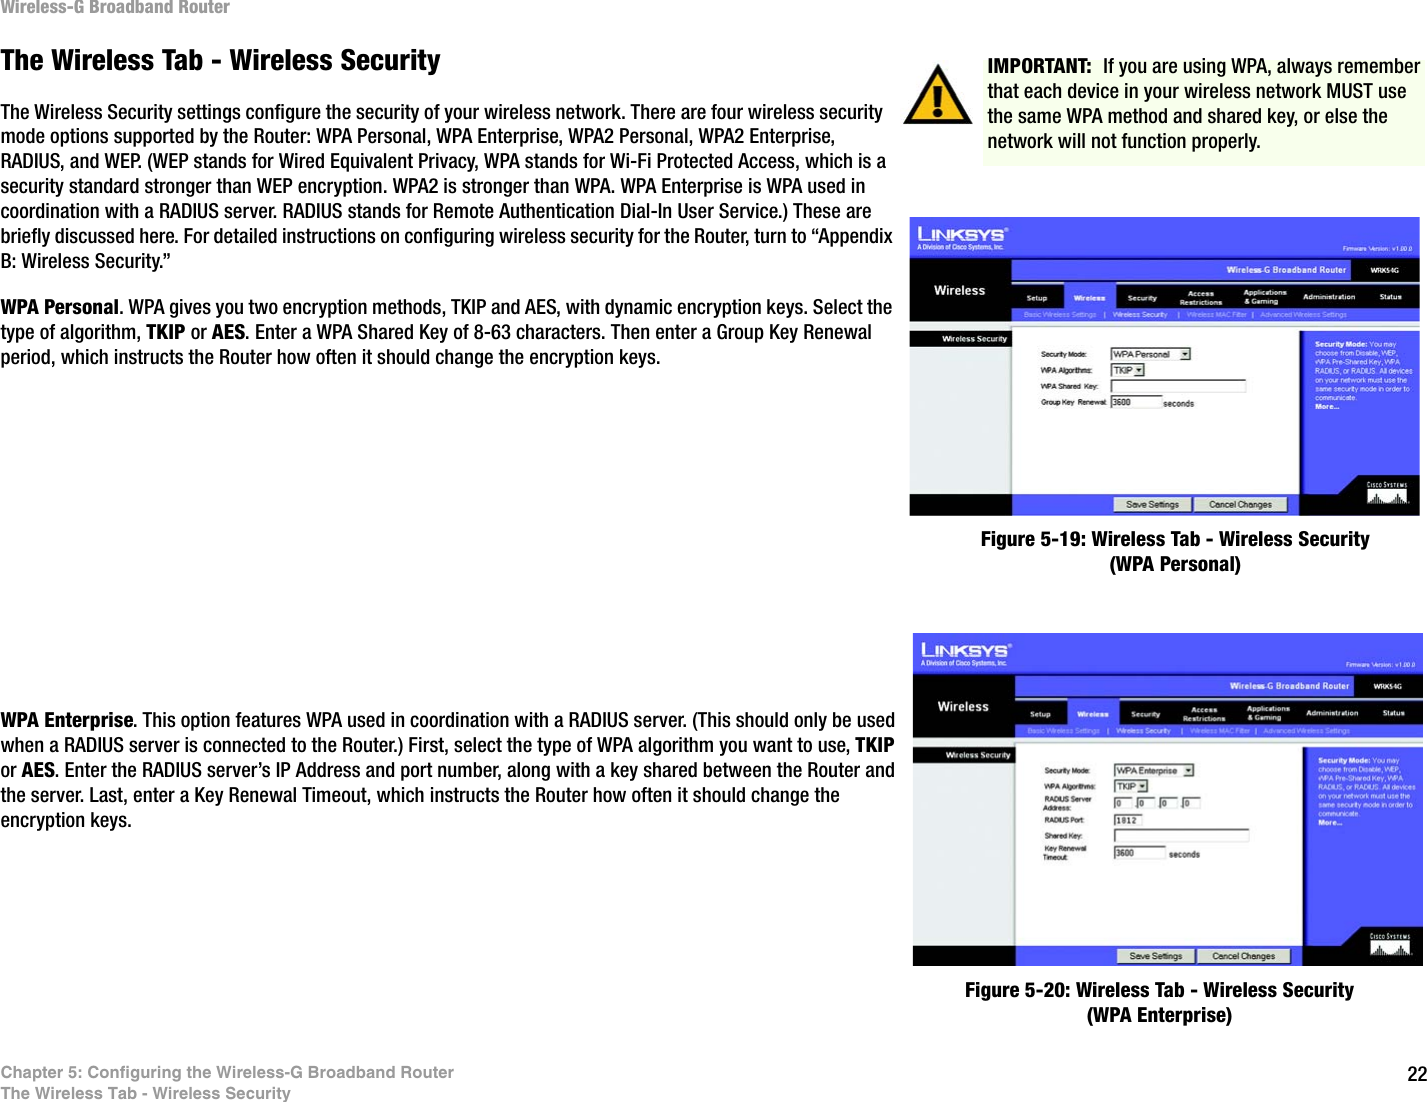 22Chapter 5: Configuring the Wireless-G Broadband RouterThe Wireless Tab - Wireless SecurityWireless-G Broadband RouterThe Wireless Tab - Wireless SecurityThe Wireless Security settings configure the security of your wireless network. There are four wireless security mode options supported by the Router: WPA Personal, WPA Enterprise, WPA2 Personal, WPA2 Enterprise, RADIUS, and WEP. (WEP stands for Wired Equivalent Privacy, WPA stands for Wi-Fi Protected Access, which is a security standard stronger than WEP encryption. WPA2 is stronger than WPA. WPA Enterprise is WPA used in coordination with a RADIUS server. RADIUS stands for Remote Authentication Dial-In User Service.) These are briefly discussed here. For detailed instructions on configuring wireless security for the Router, turn to “Appendix B: Wireless Security.”WPA Personal. WPA gives you two encryption methods, TKIP and AES, with dynamic encryption keys. Select the type of algorithm, TKIP or AES. Enter a WPA Shared Key of 8-63 characters. Then enter a Group Key Renewal period, which instructs the Router how often it should change the encryption keys.WPA Enterprise. This option features WPA used in coordination with a RADIUS server. (This should only be used when a RADIUS server is connected to the Router.) First, select the type of WPA algorithm you want to use, TKIP or AES. Enter the RADIUS server’s IP Address and port number, along with a key shared between the Router and the server. Last, enter a Key Renewal Timeout, which instructs the Router how often it should change the encryption keys.Figure 5-20: Wireless Tab - Wireless Security (WPA Enterprise)Figure 5-19: Wireless Tab - Wireless Security (WPA Personal)IMPORTANT:  If you are using WPA, always remember that each device in your wireless network MUST use the same WPA method and shared key, or else the network will not function properly.